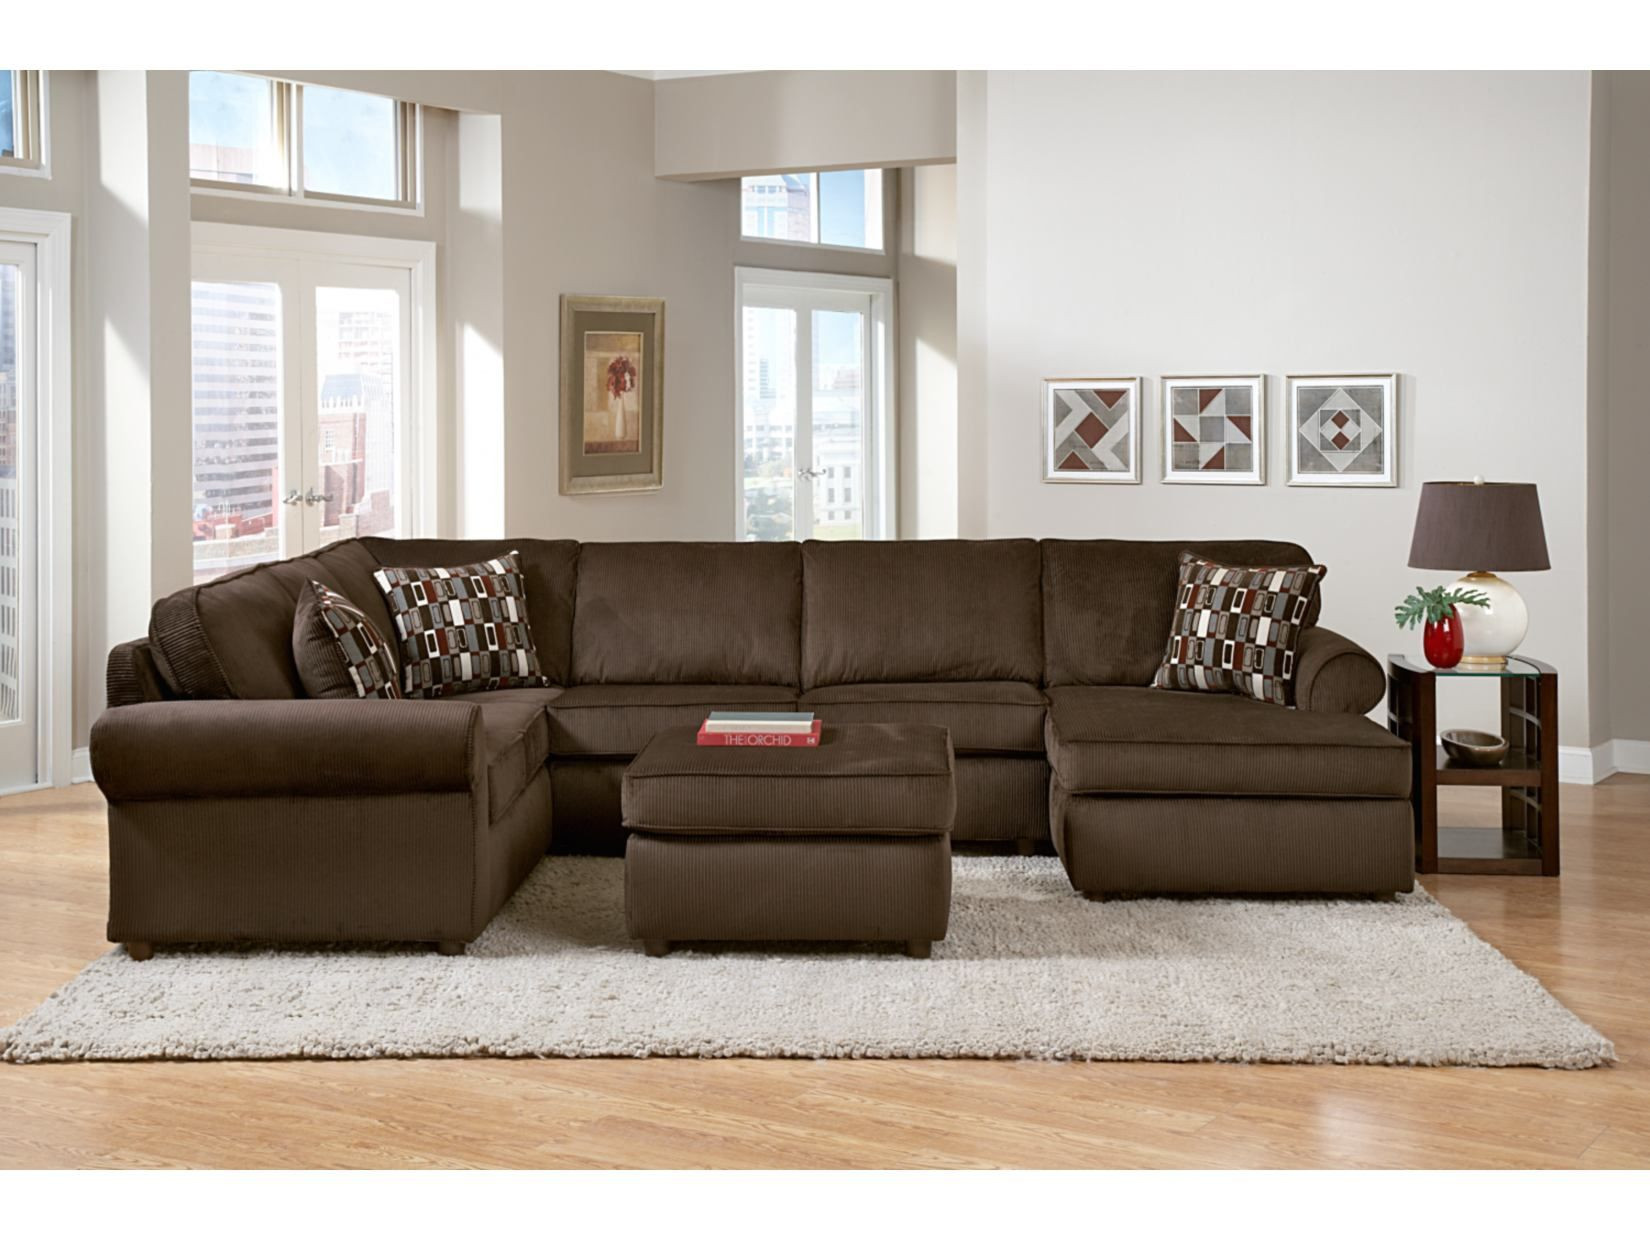 Value City Furniture Clearance Living Room Sets